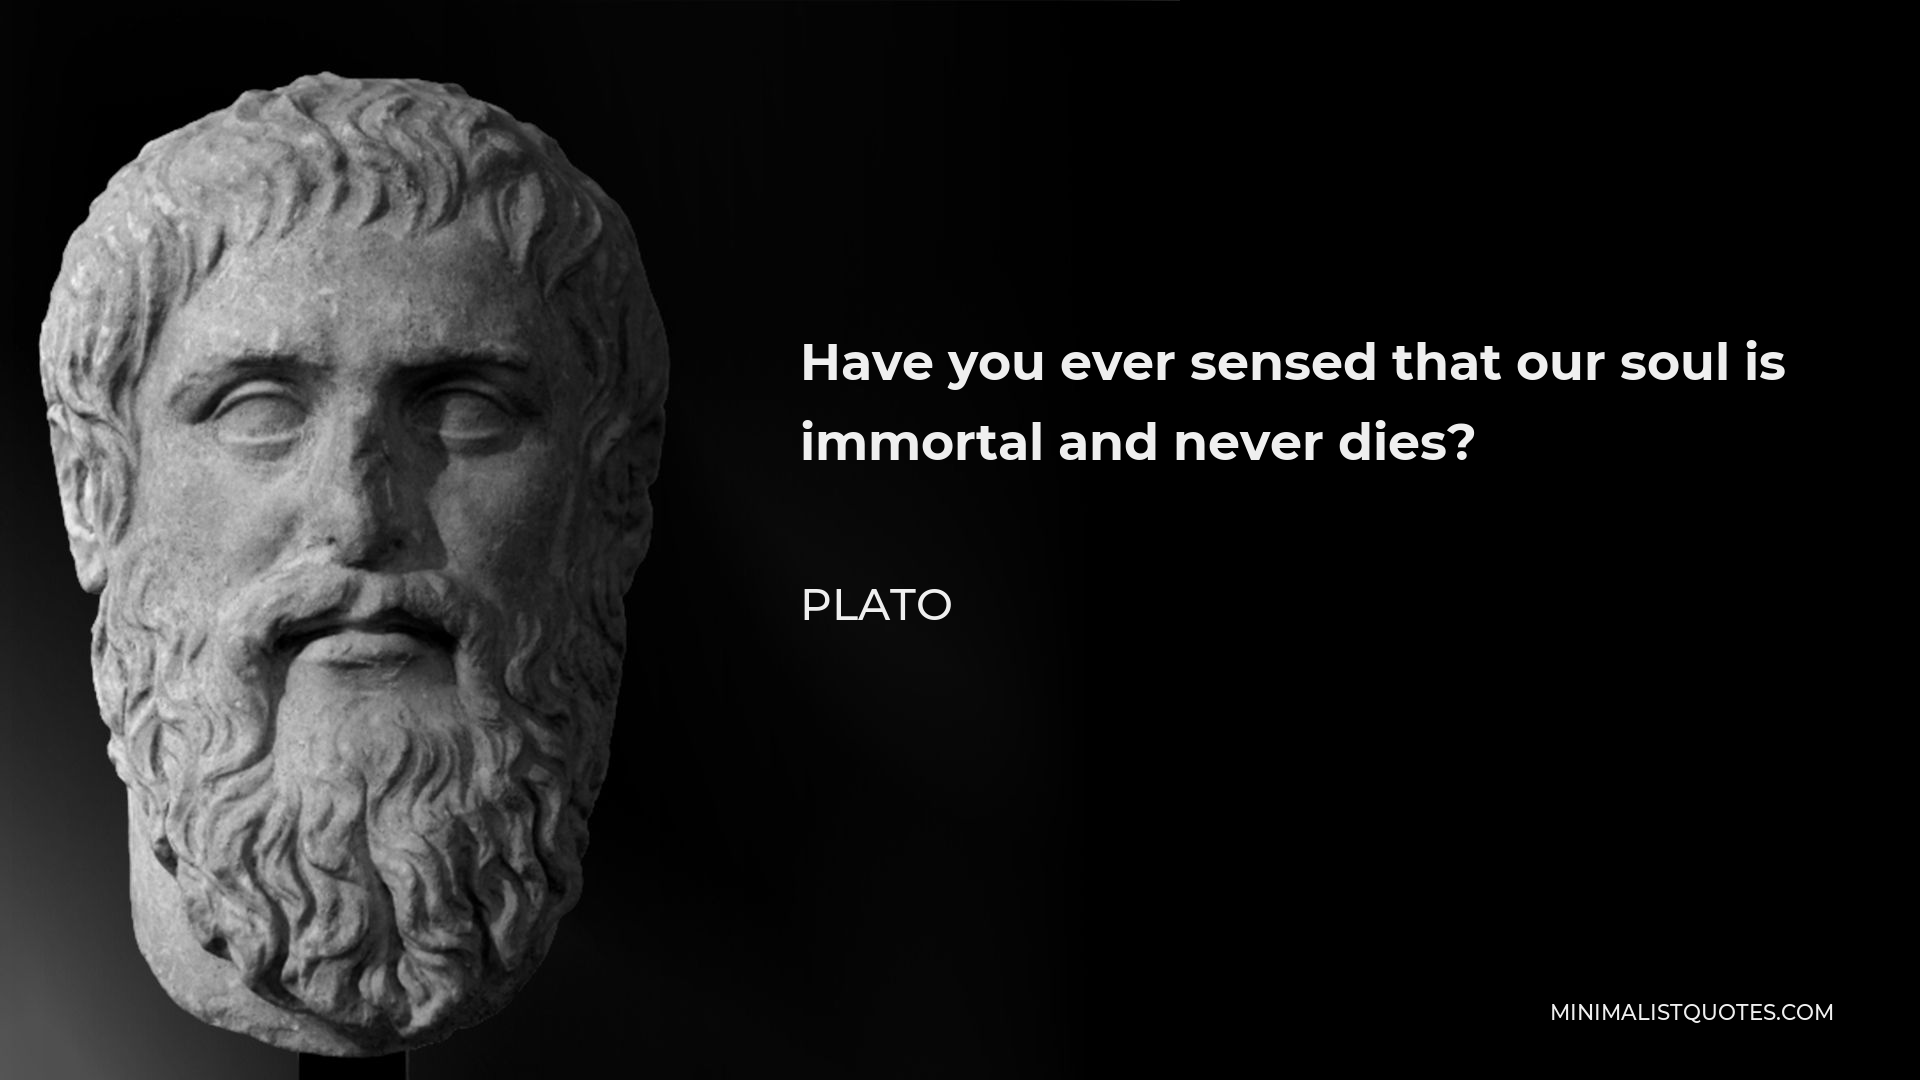 Plato Quote - Have you ever sensed that our soul is immortal and never dies?